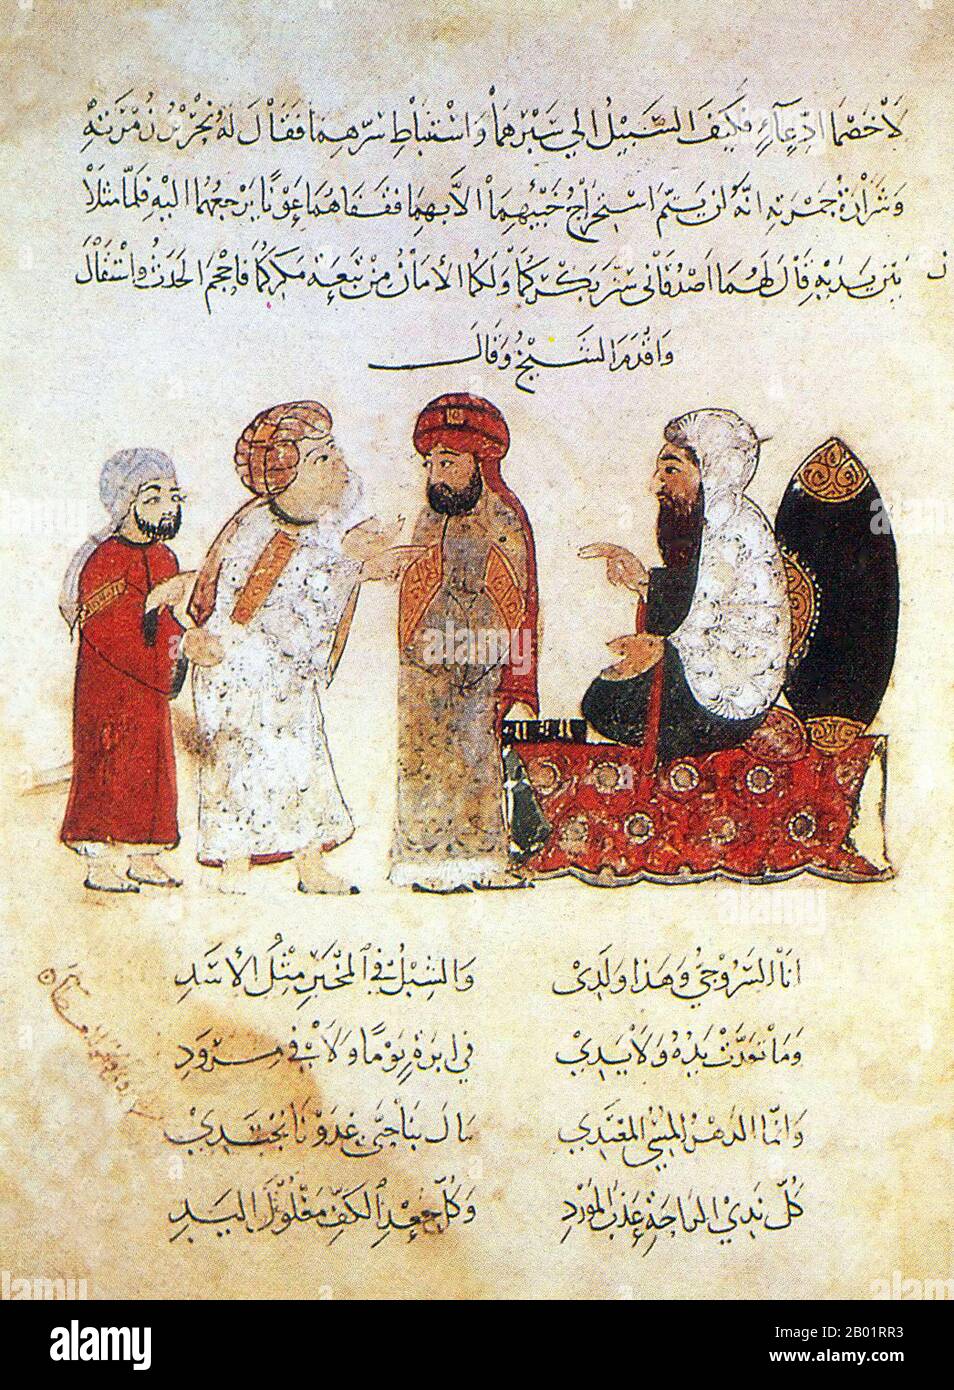 Iraq: An enthroned ruler, his advisor and two supplicants. Miniature painting by Yahya ibn Mahmud al-Wasiti, 1237 CE.  Yahyâ ibn Mahmûd al-Wâsitî was a 13th-century Arab Islamic artist. Al-Wasiti was born in Wasit in southern Iraq. He was noted for his illustrations of the Maqam of al-Hariri.  Maqāma (literally 'assemblies') are an (originally) Arabic literary genre of rhymed prose with intervals of poetry in which rhetorical extravagance is conspicuous. The 10th century author Badī' al-Zaman al-Hamadhāni is said to have invented the form, which was extended by al-Hariri of Basra. Stock Photo